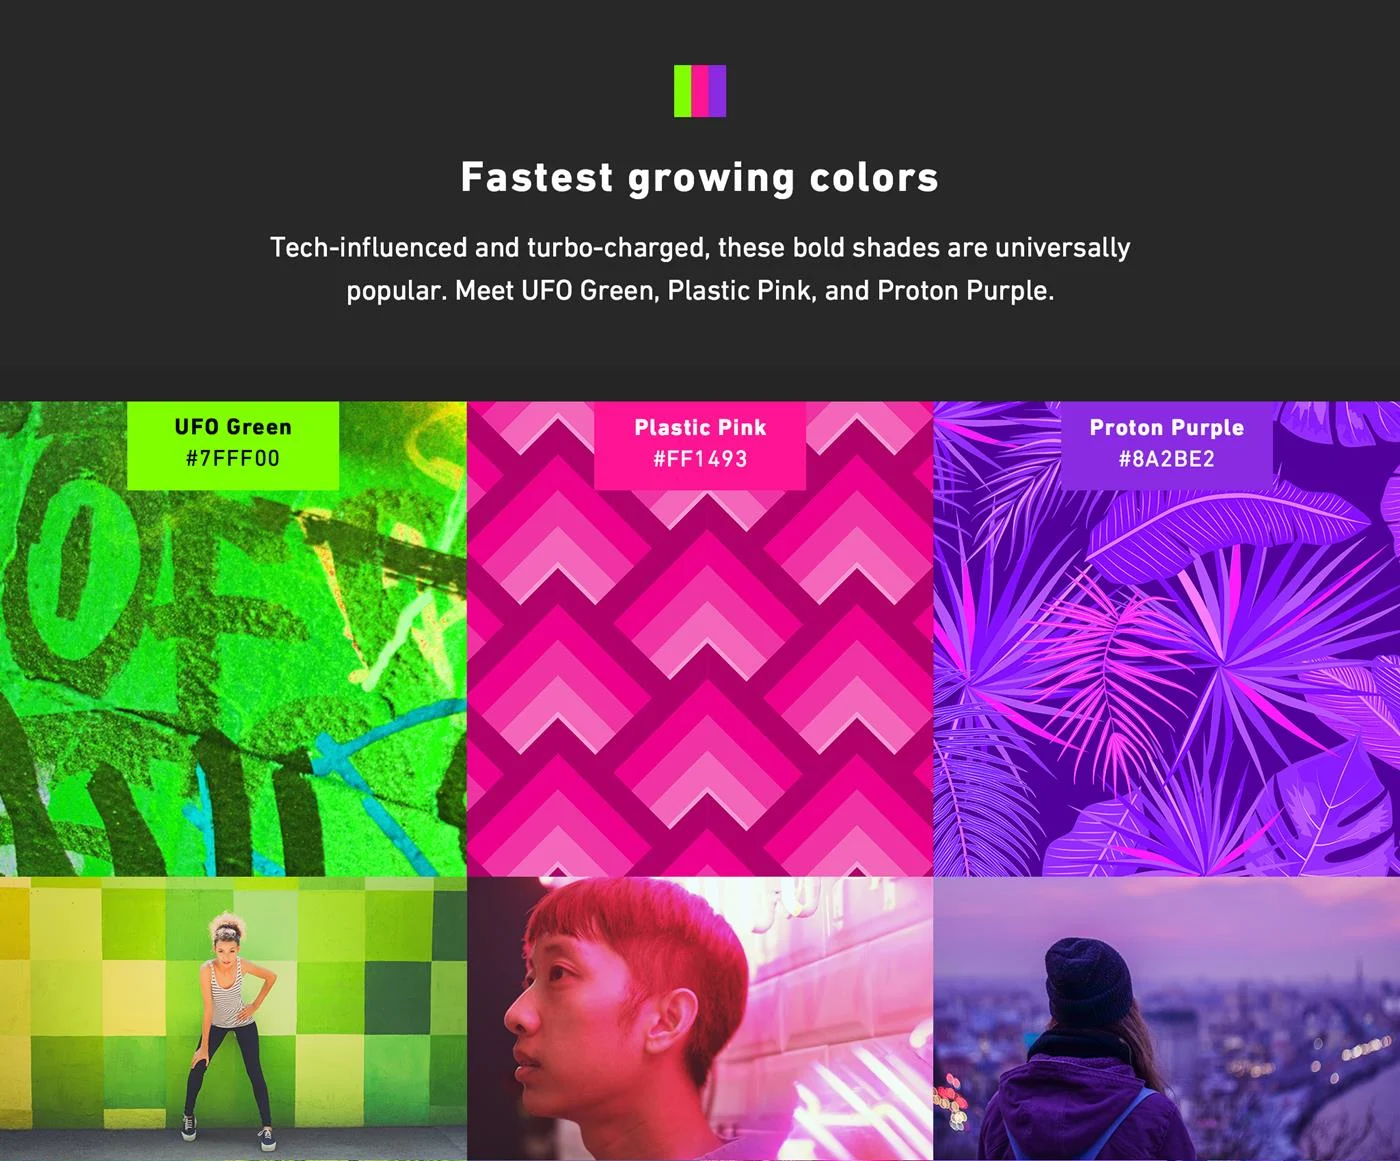 Shutterstock’s 2019 Color Trends Infographic Shares Up-And-Coming Hues To Note